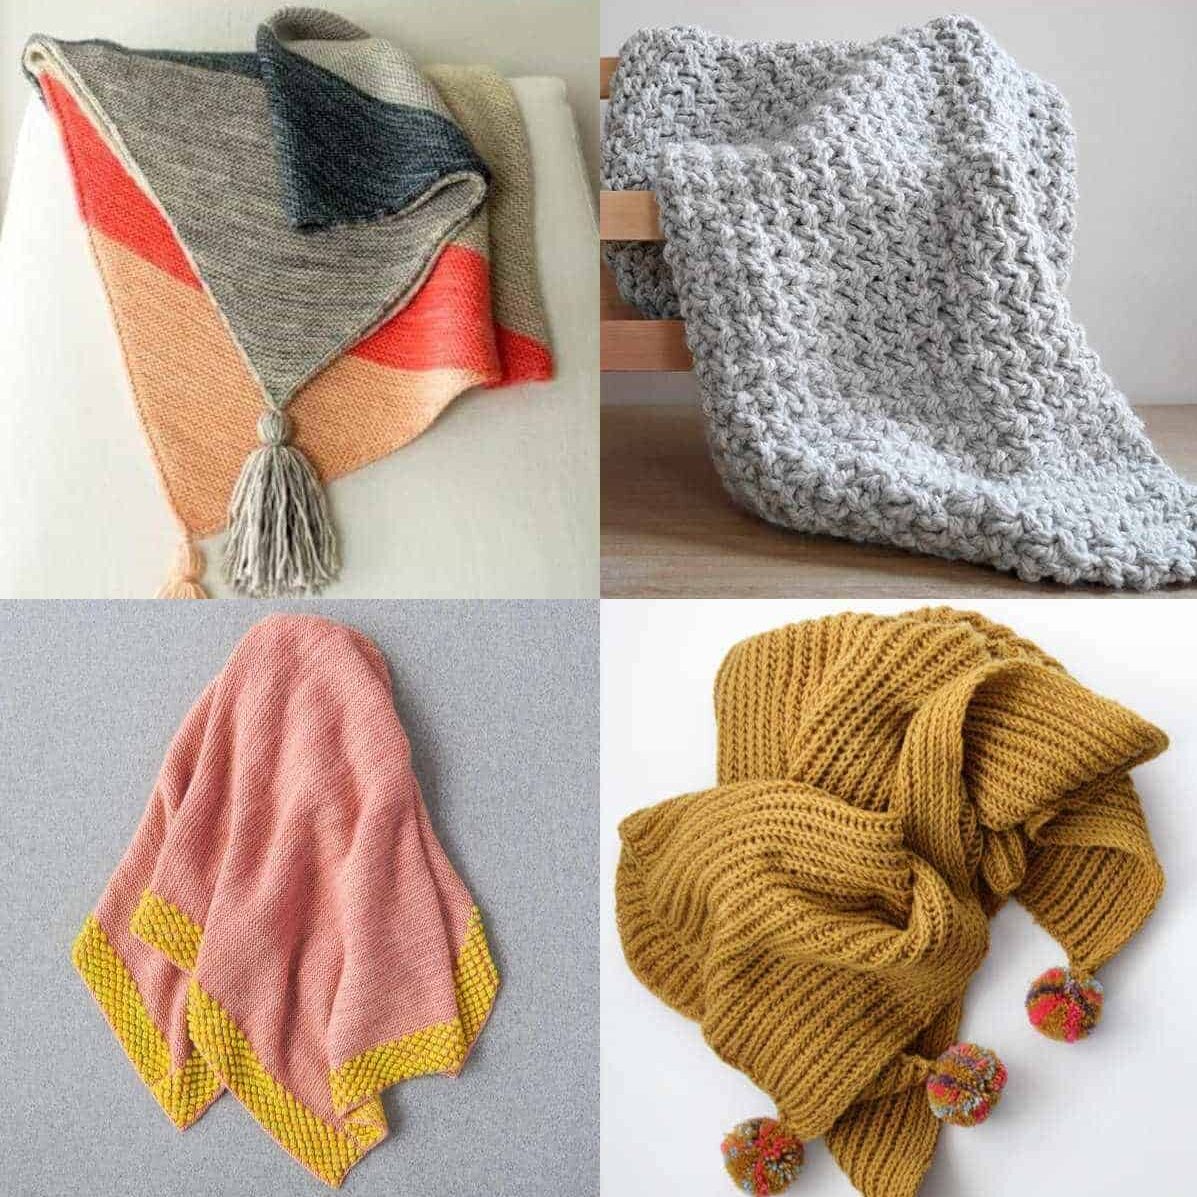 A grid of baby knit blanket patterns.